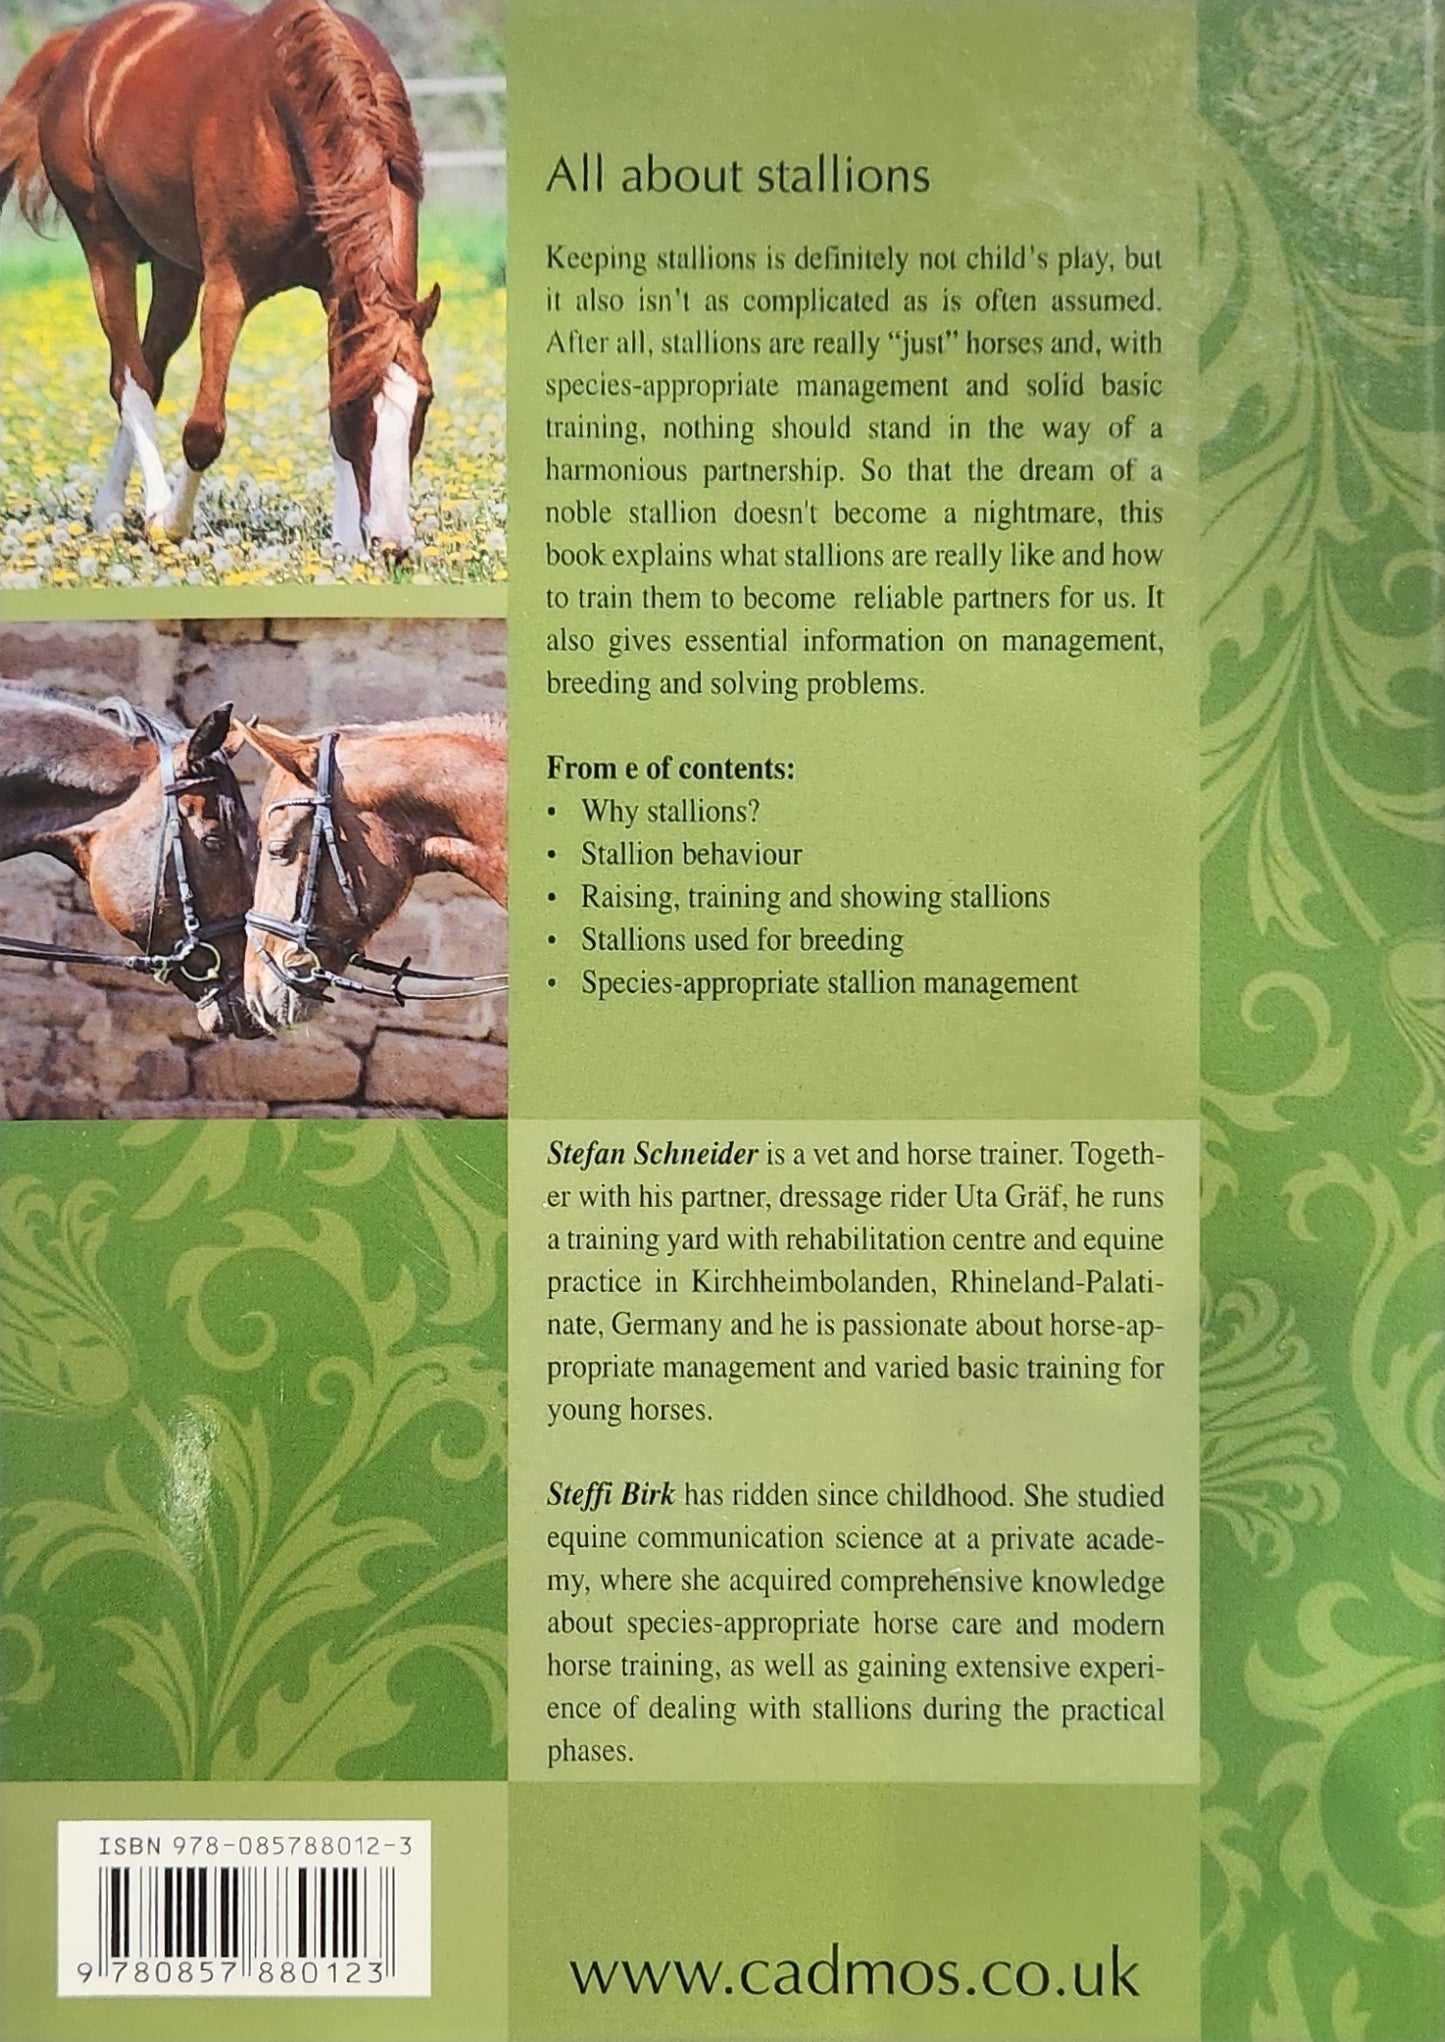 Stallions - care and management